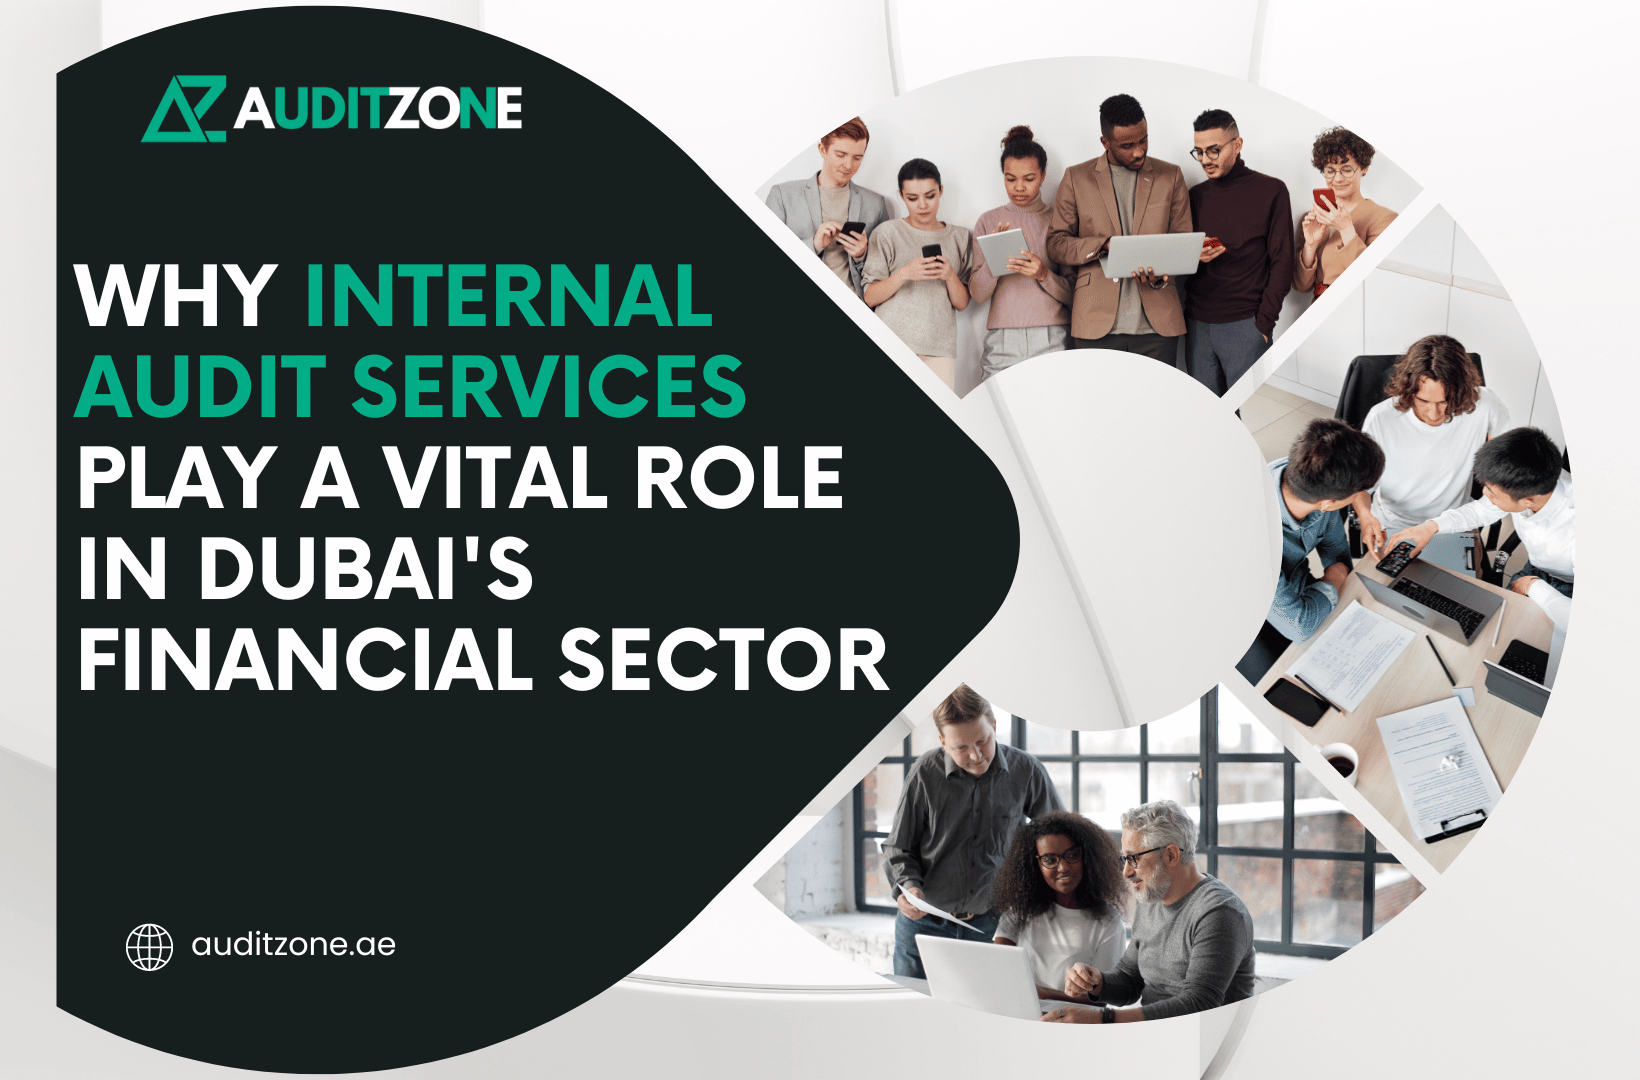 Why Internal Audit Services Play a Vital Role in Dubai's Financial Sector